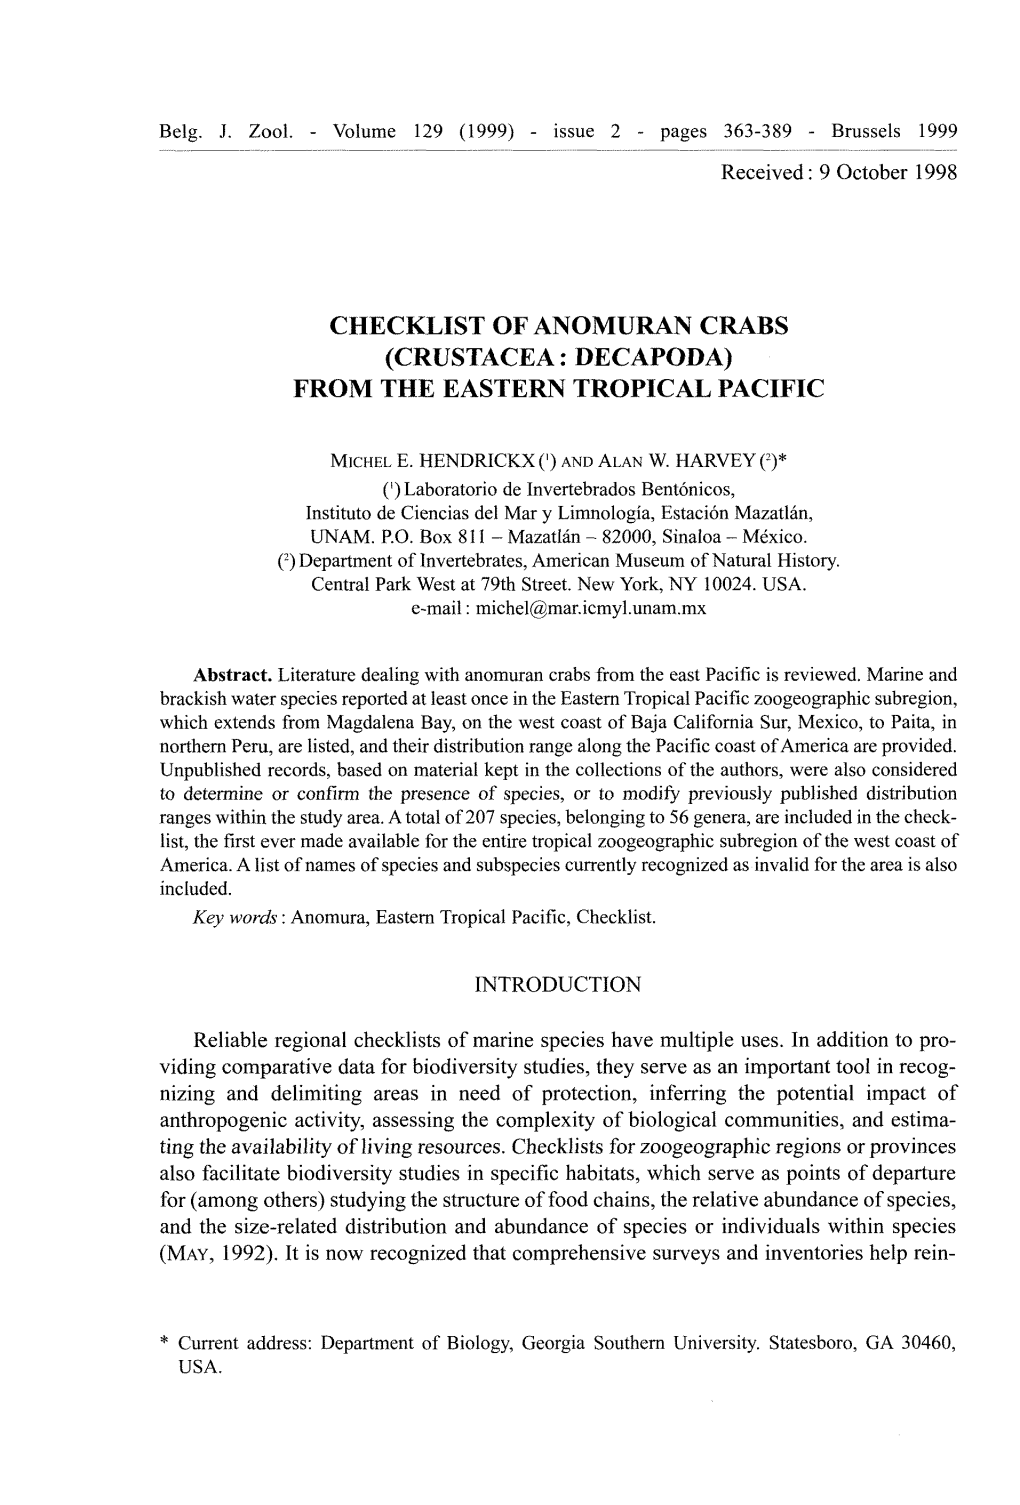 Checklist of Anomuran Crabs (Crustacea: Decapoda) from the Eastern Tropical Pacific